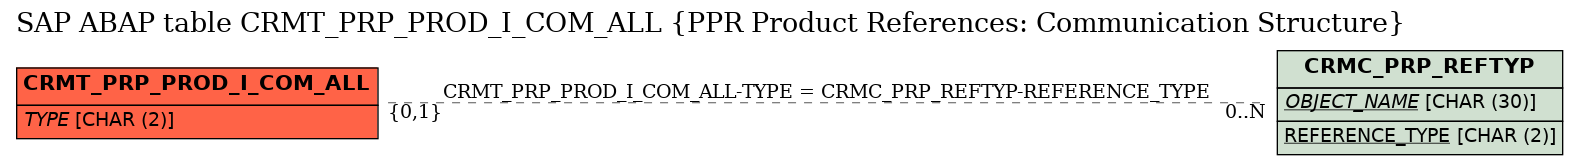 E-R Diagram for table CRMT_PRP_PROD_I_COM_ALL (PPR Product References: Communication Structure)